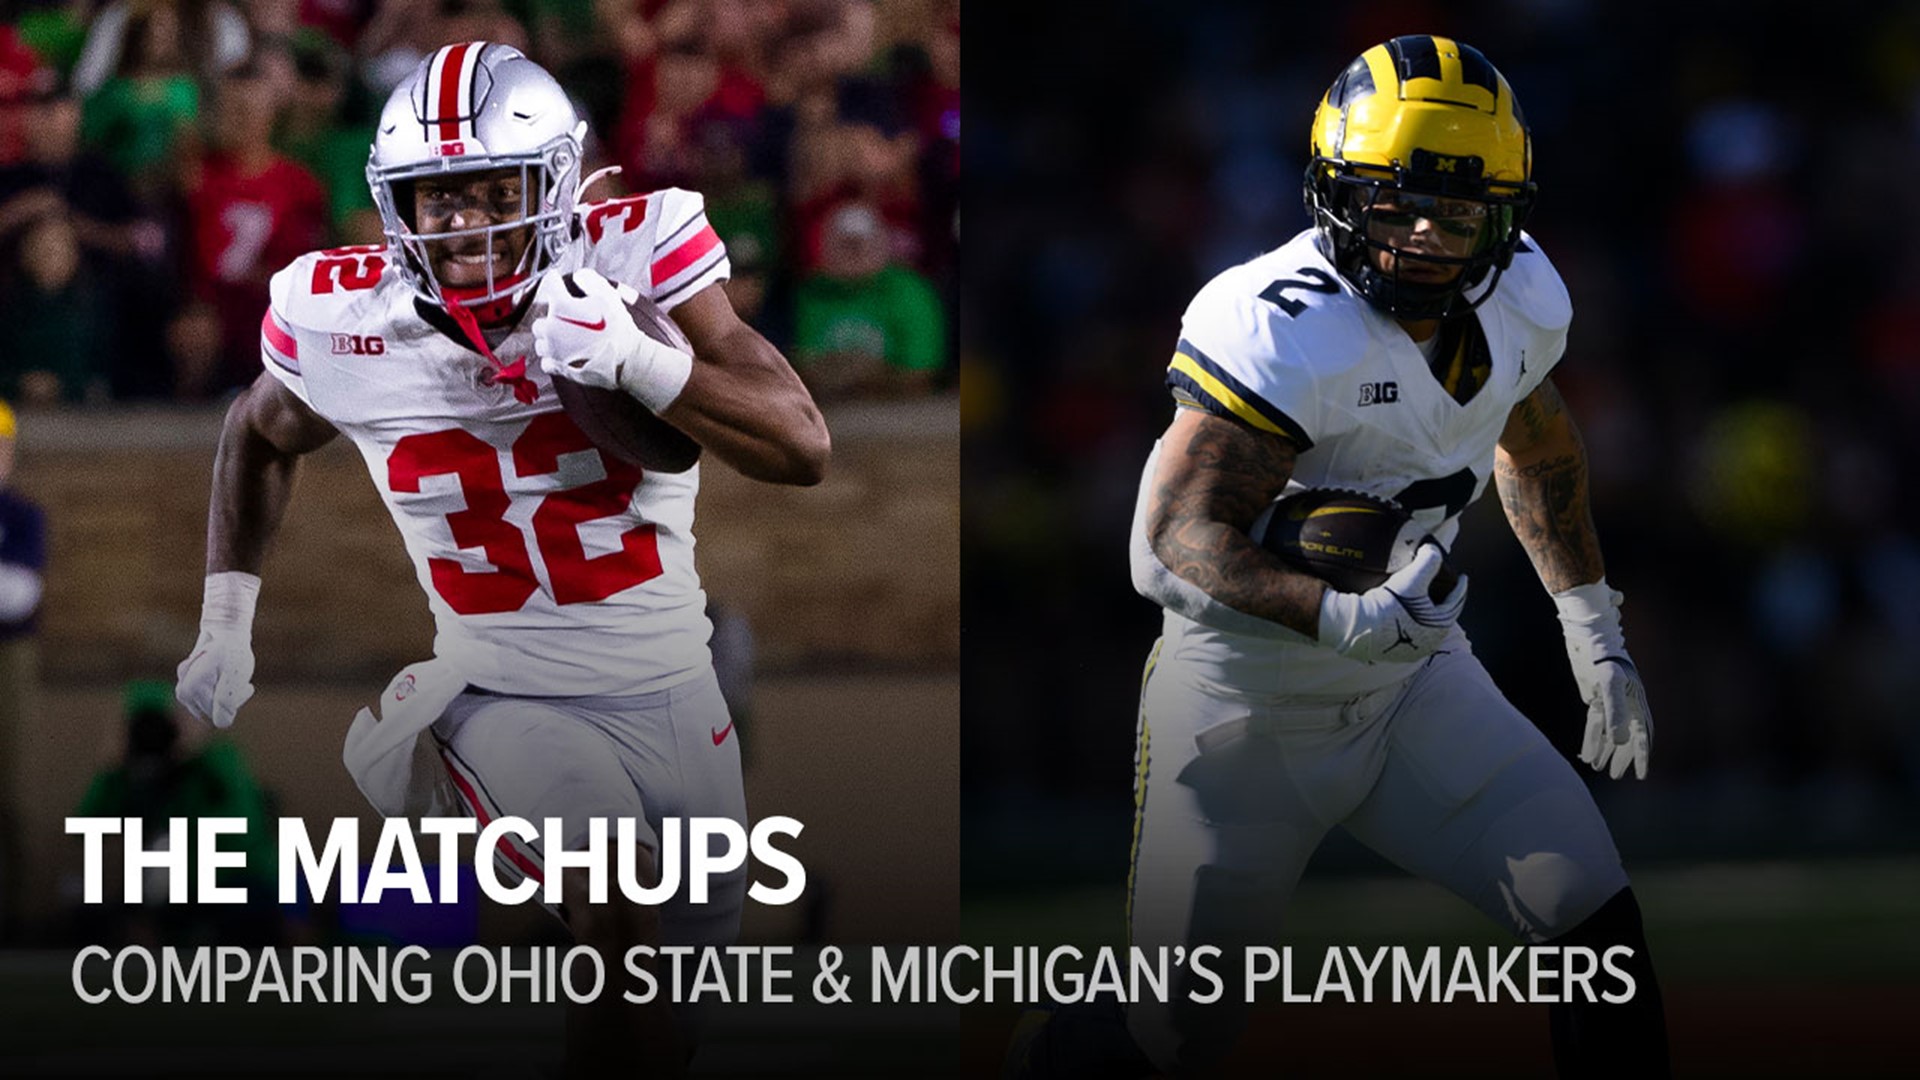 A look at playermakers on both sides of the ball for the Buckeyes and the Wolverines.